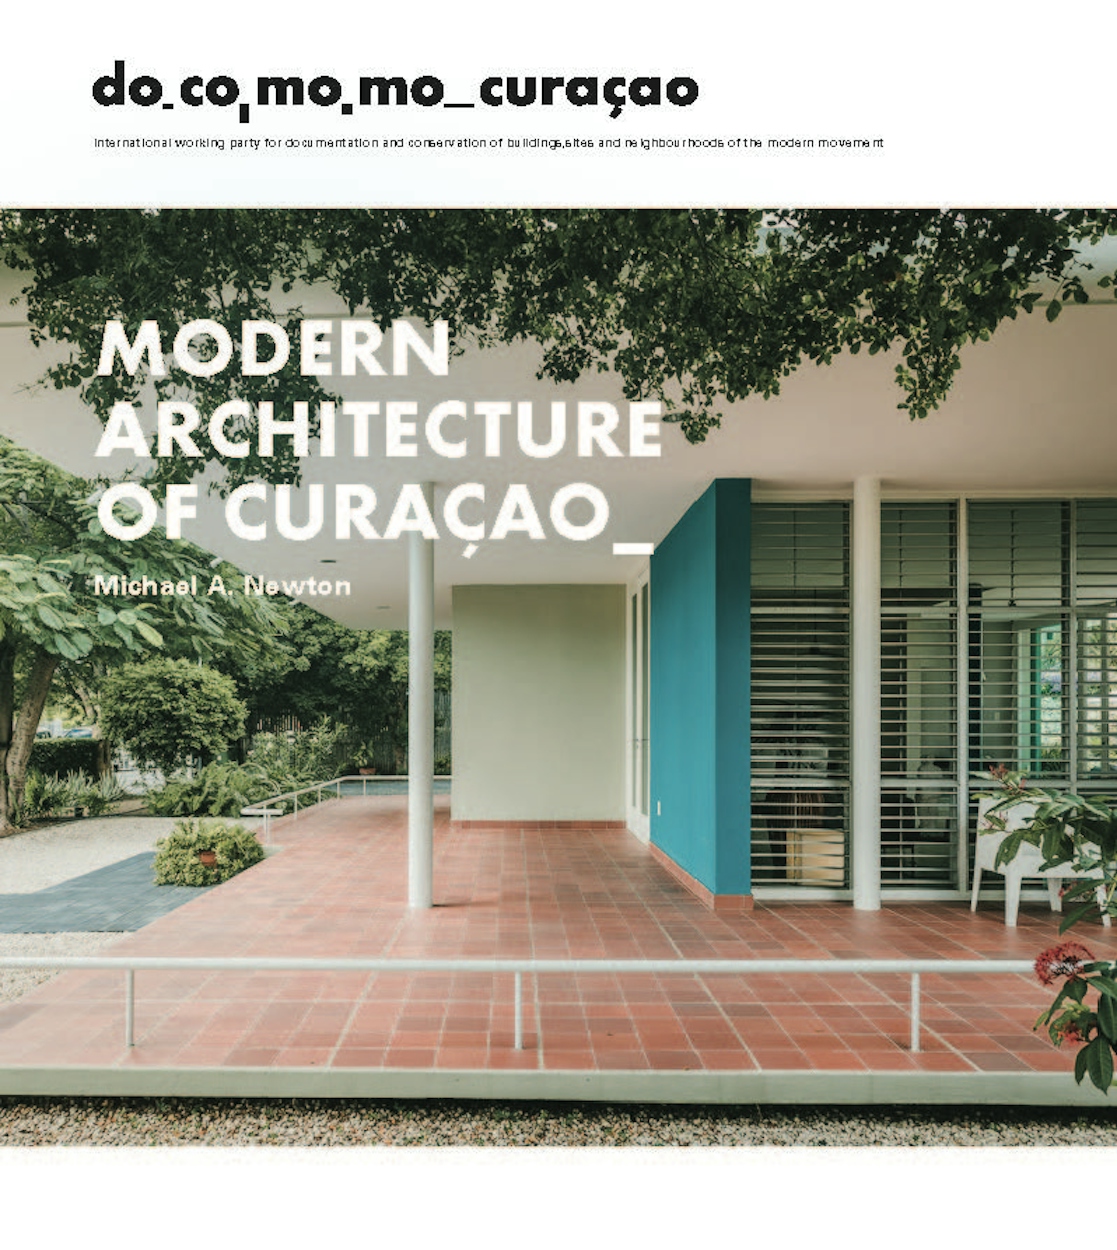 Modern Architecture of Curacao